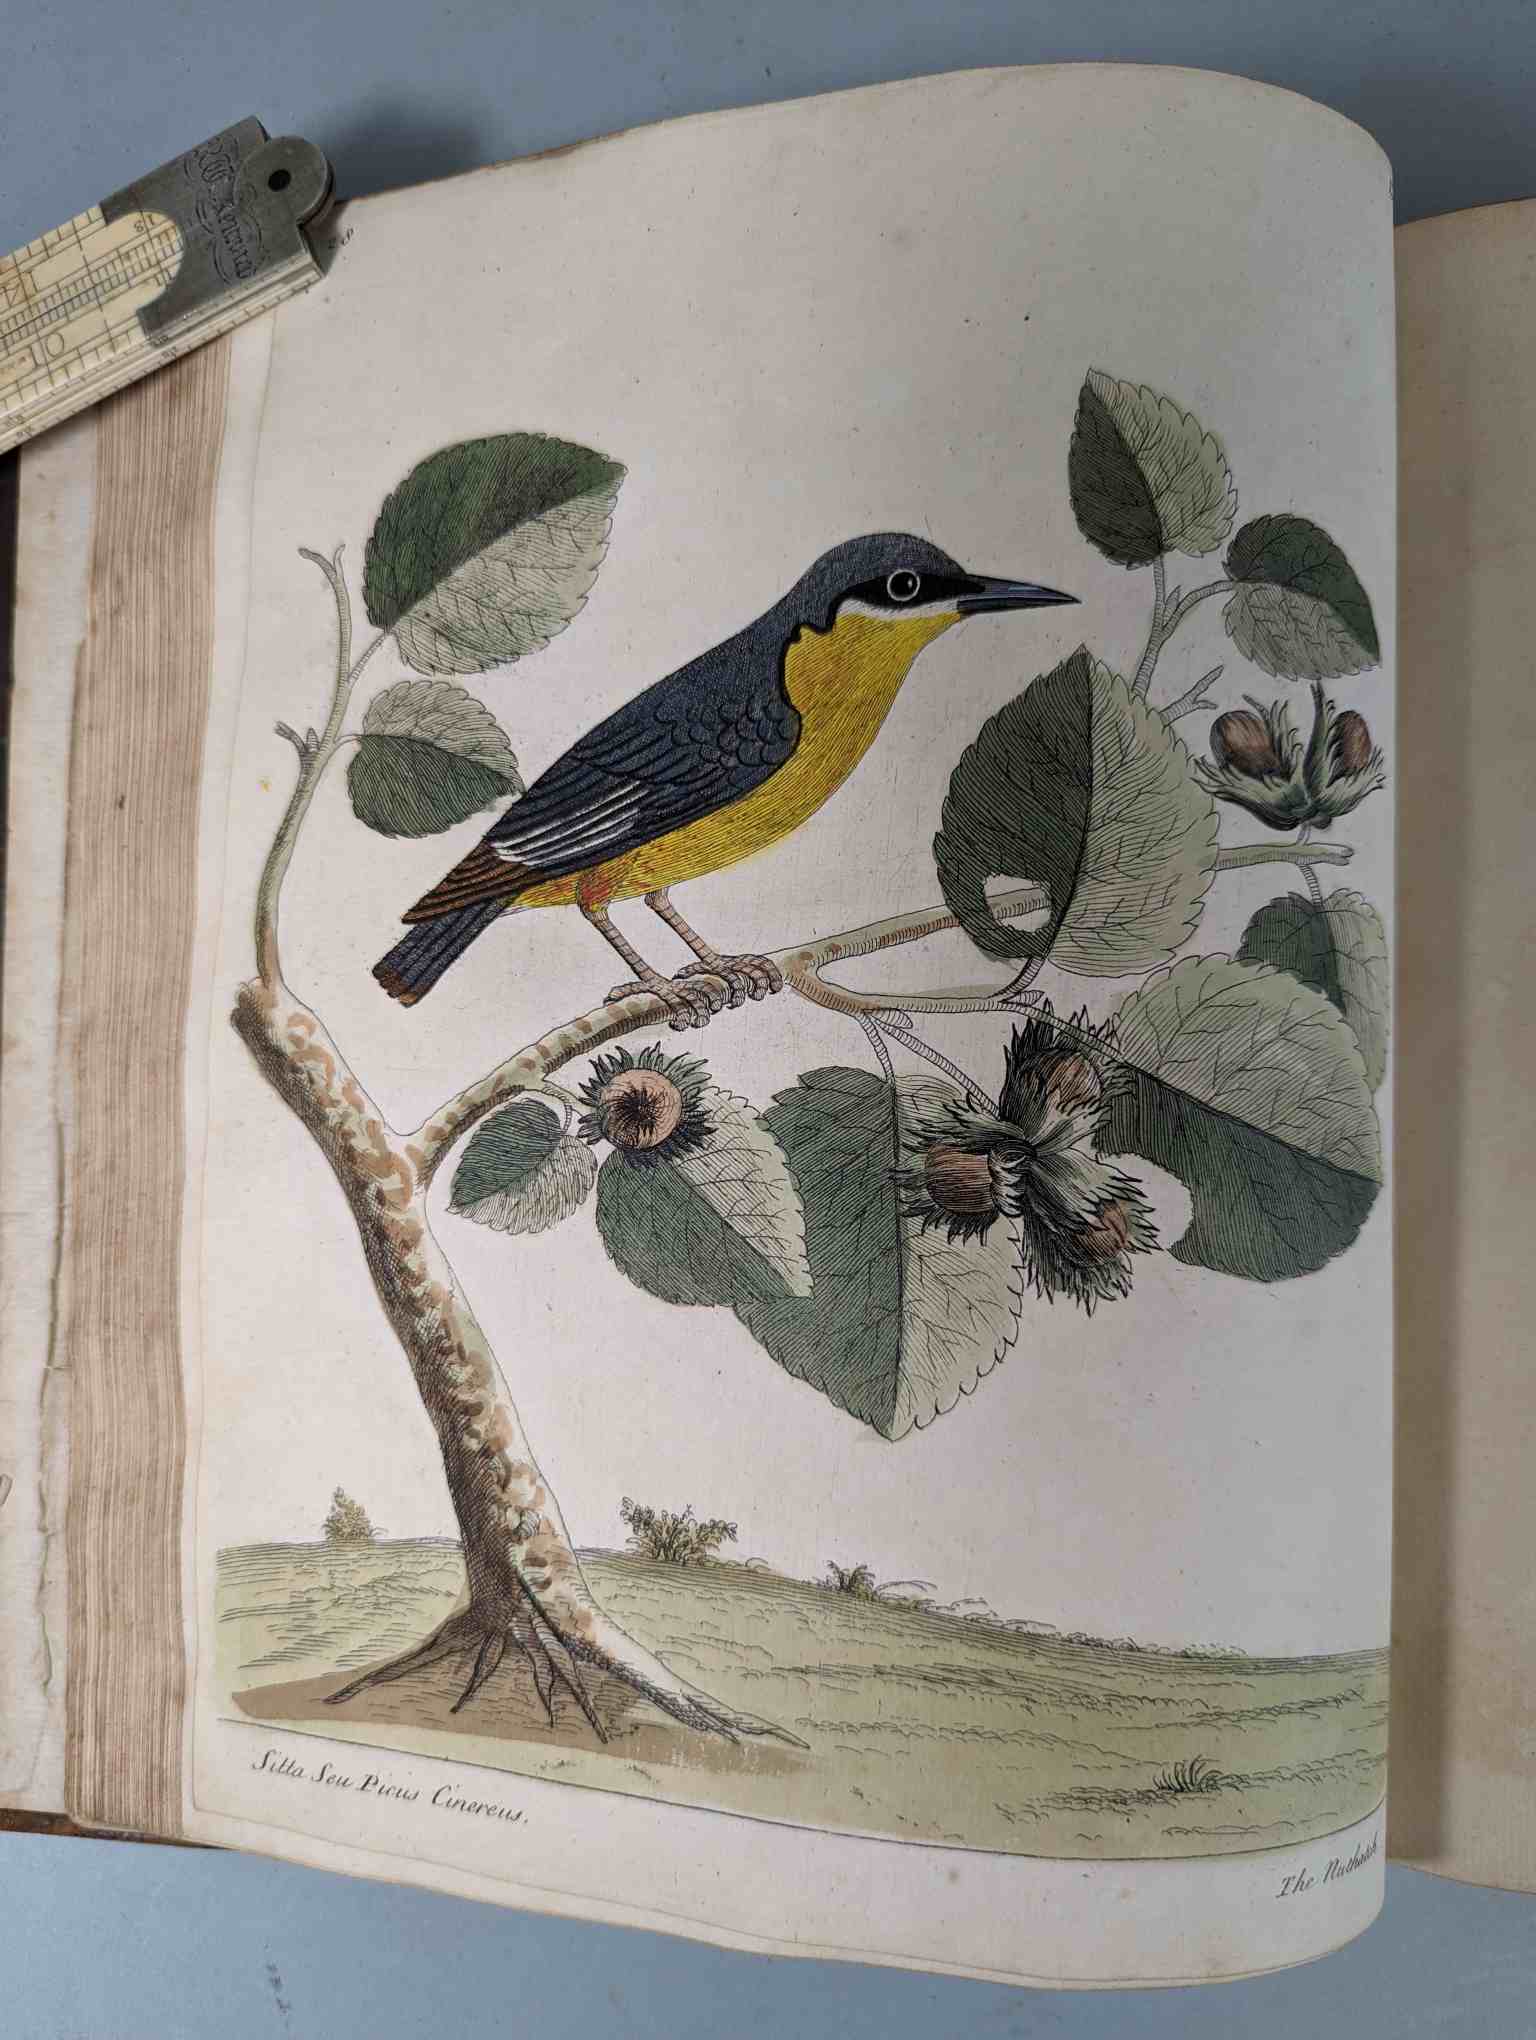 ALBIN, Eleazar. A Natural History of Birds, to which are added, Notes and Observations by W. - Image 132 of 208